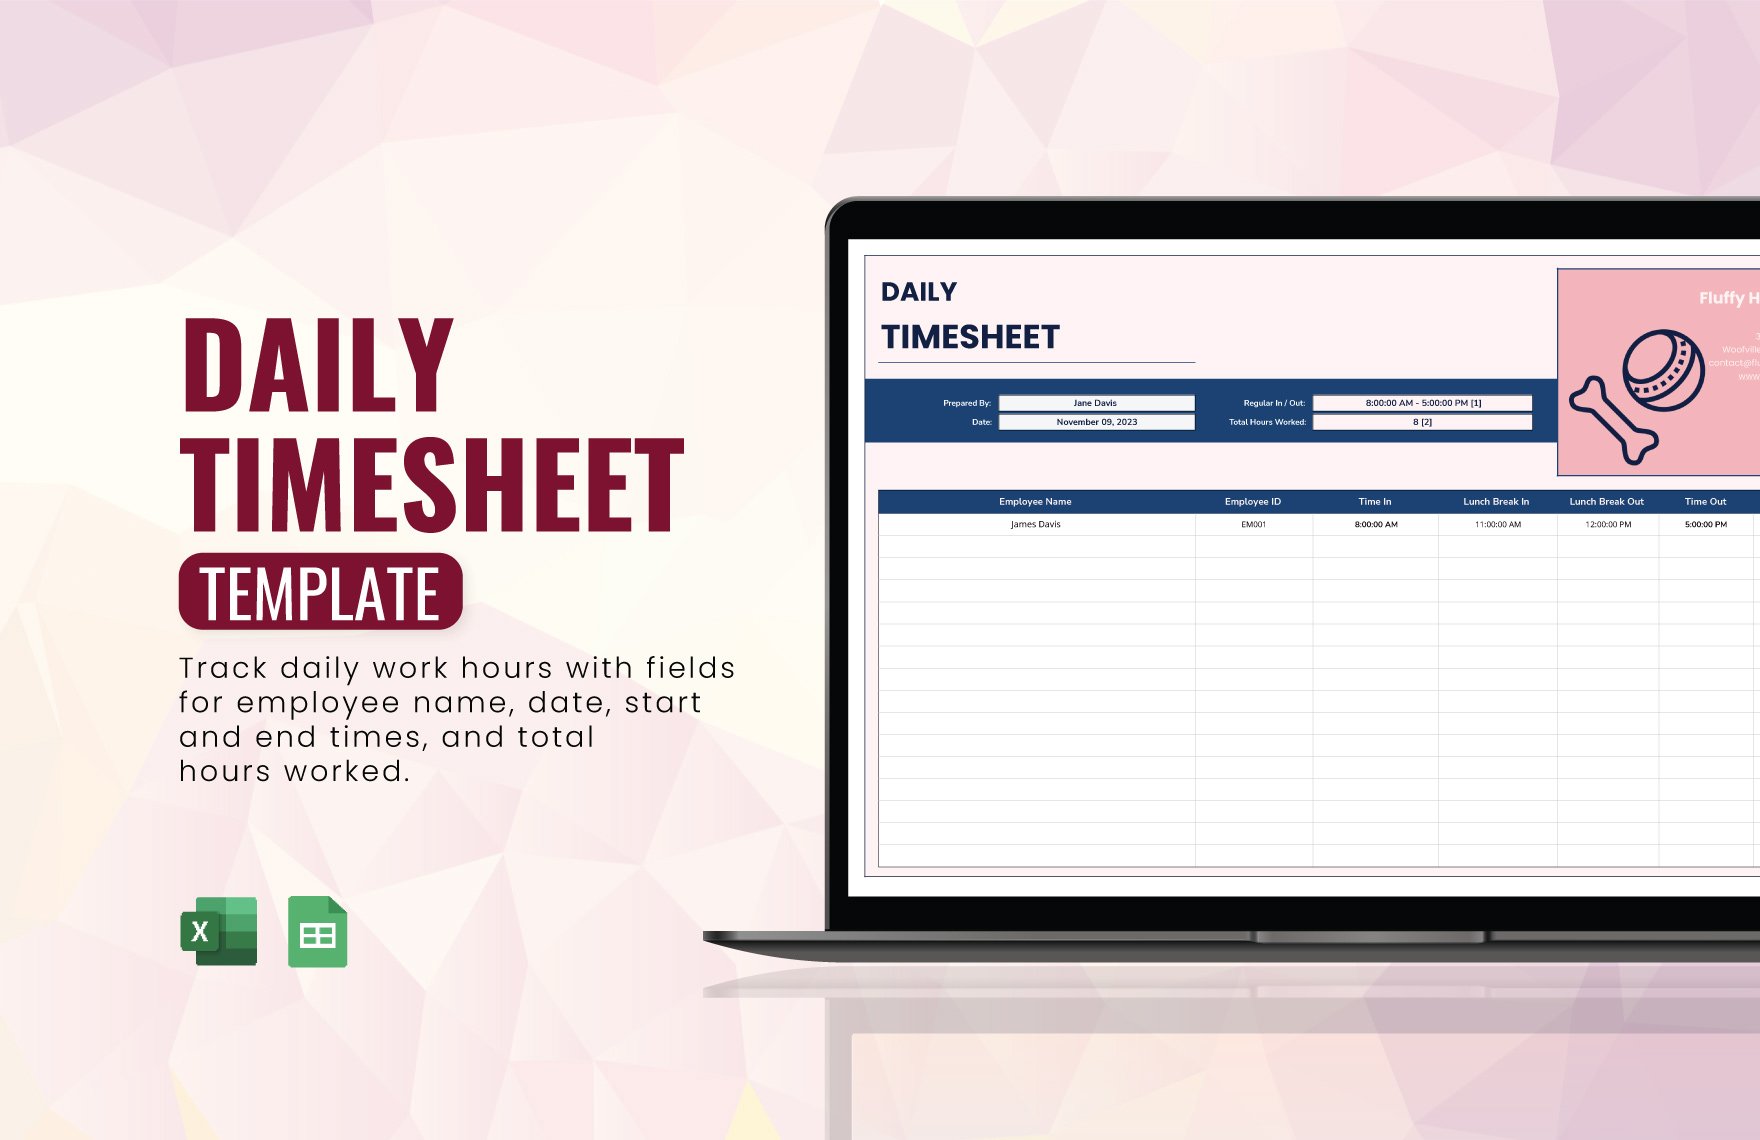 Free Daily Timesheet Template in Excel, Google Sheets